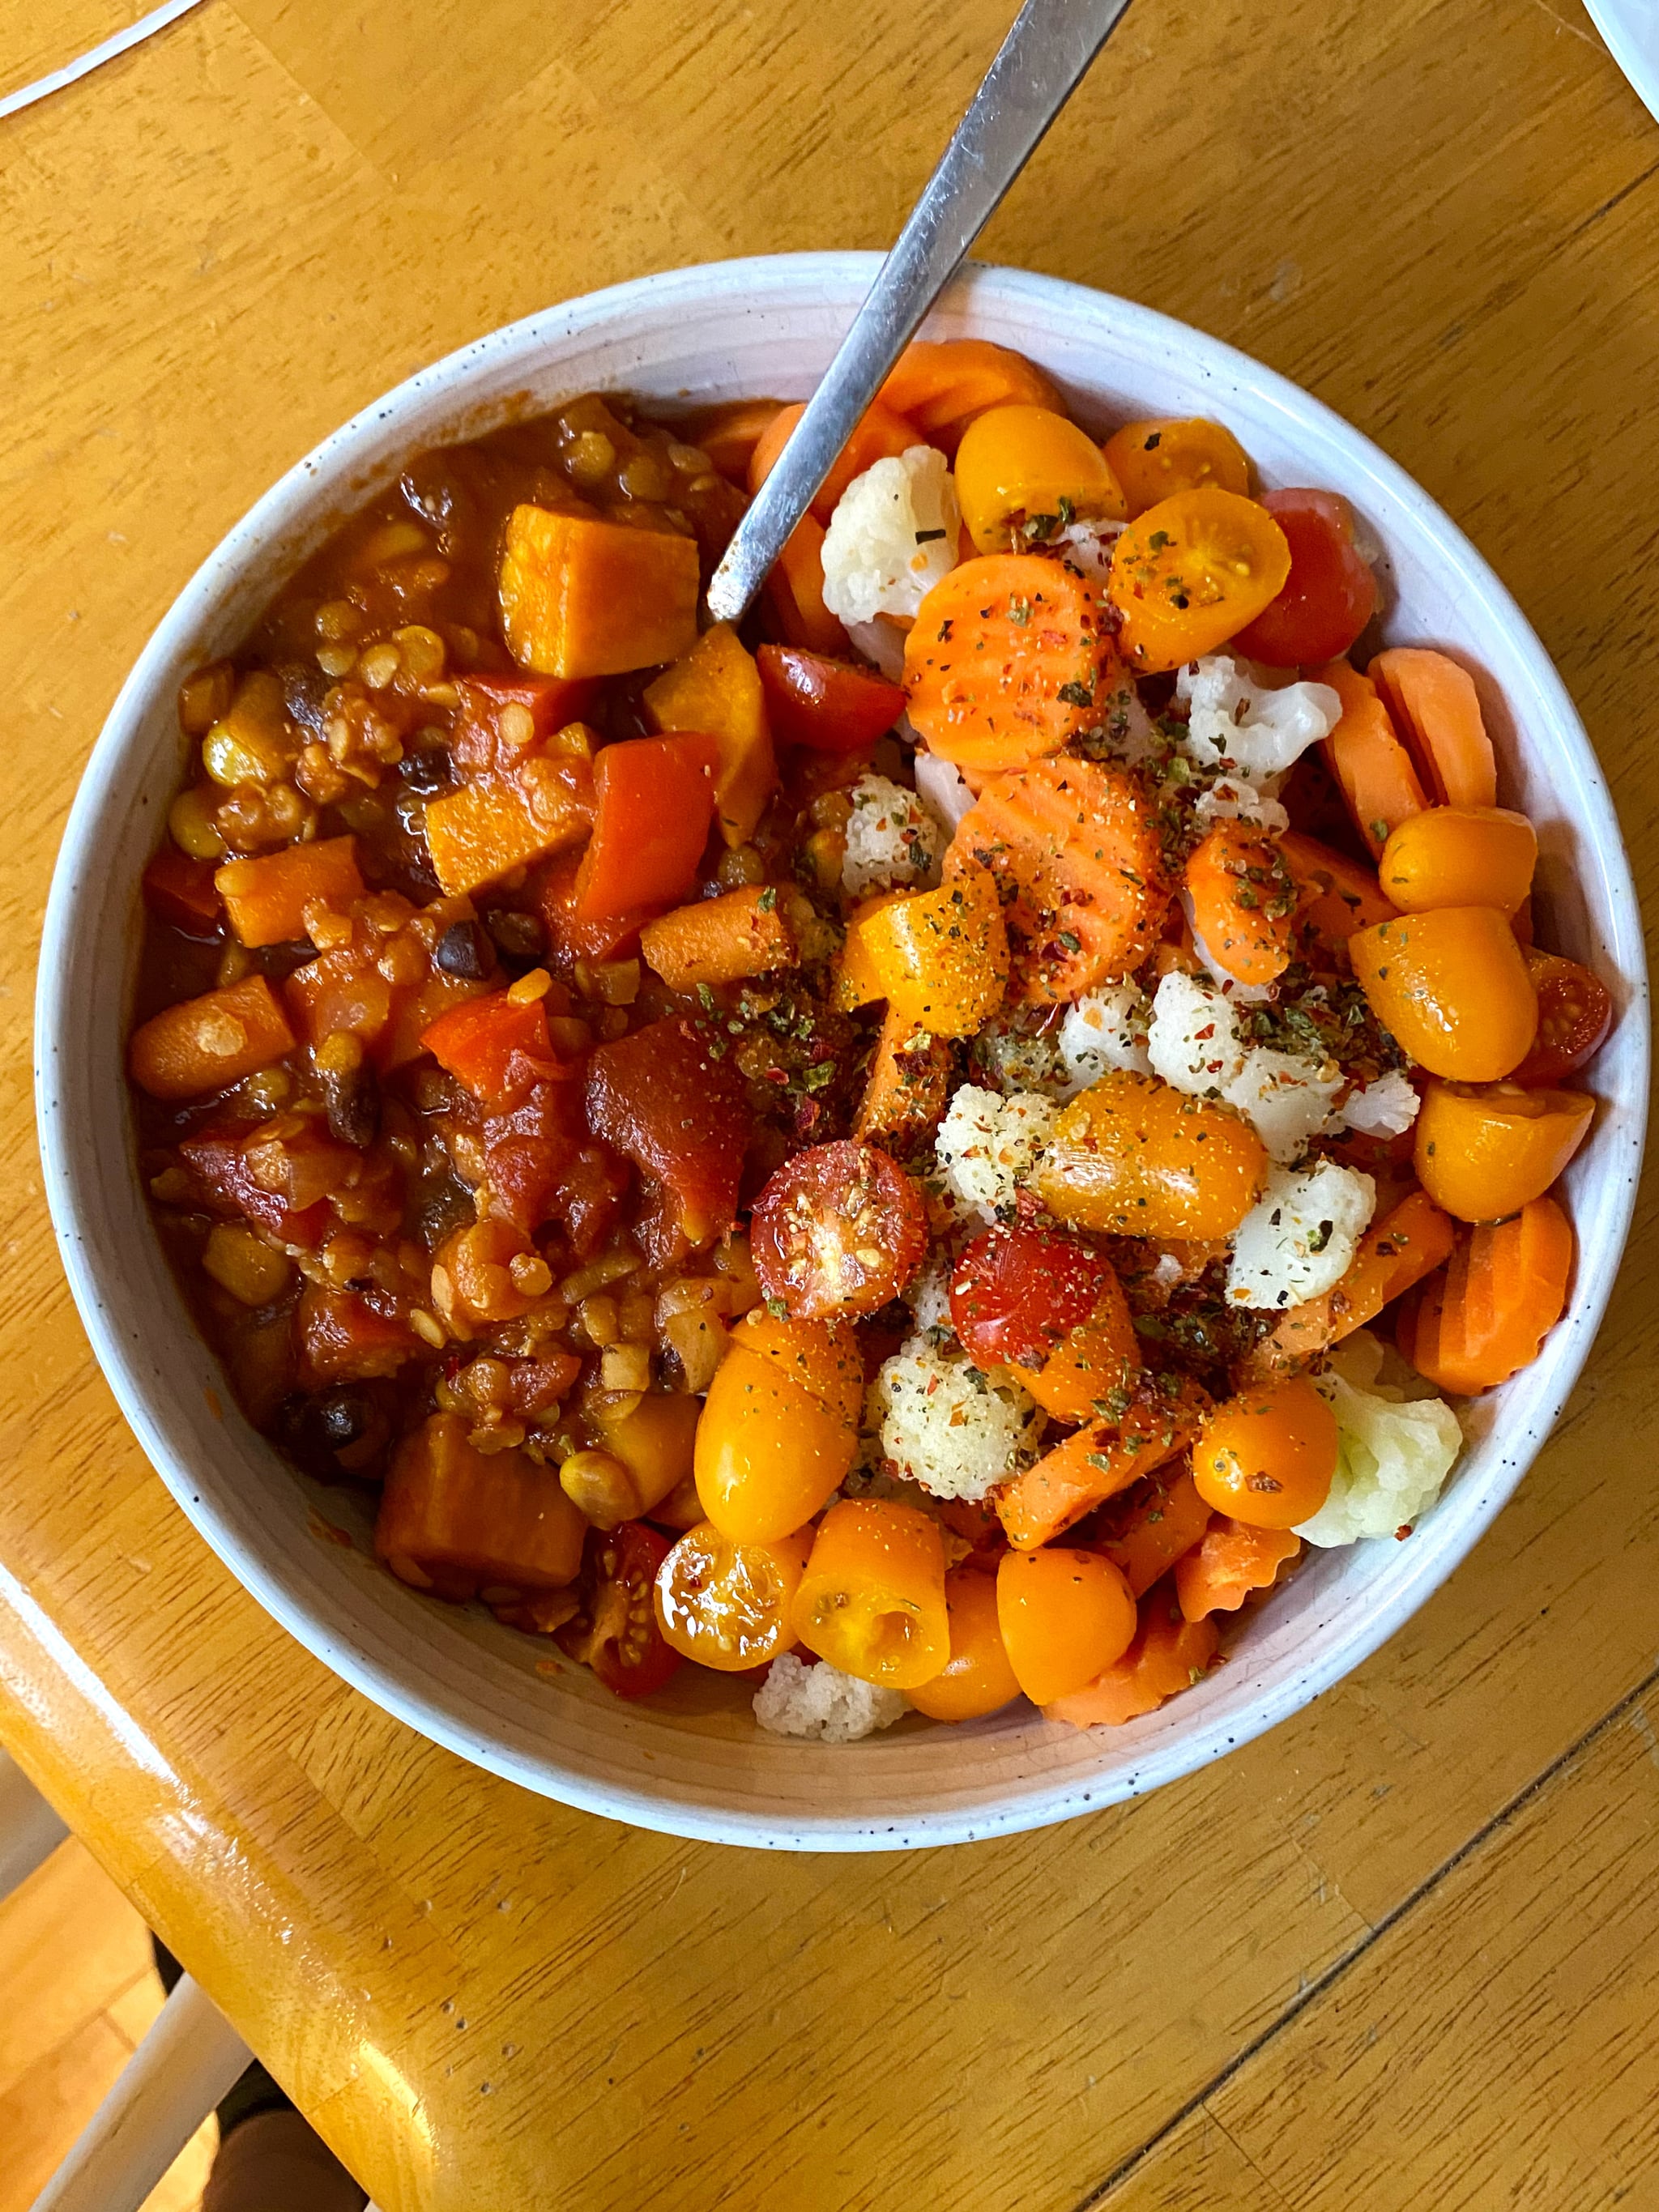 Dinner: Sweet-Potato Lentil Chili With Cauliflower, Carrots, and Tomatoes